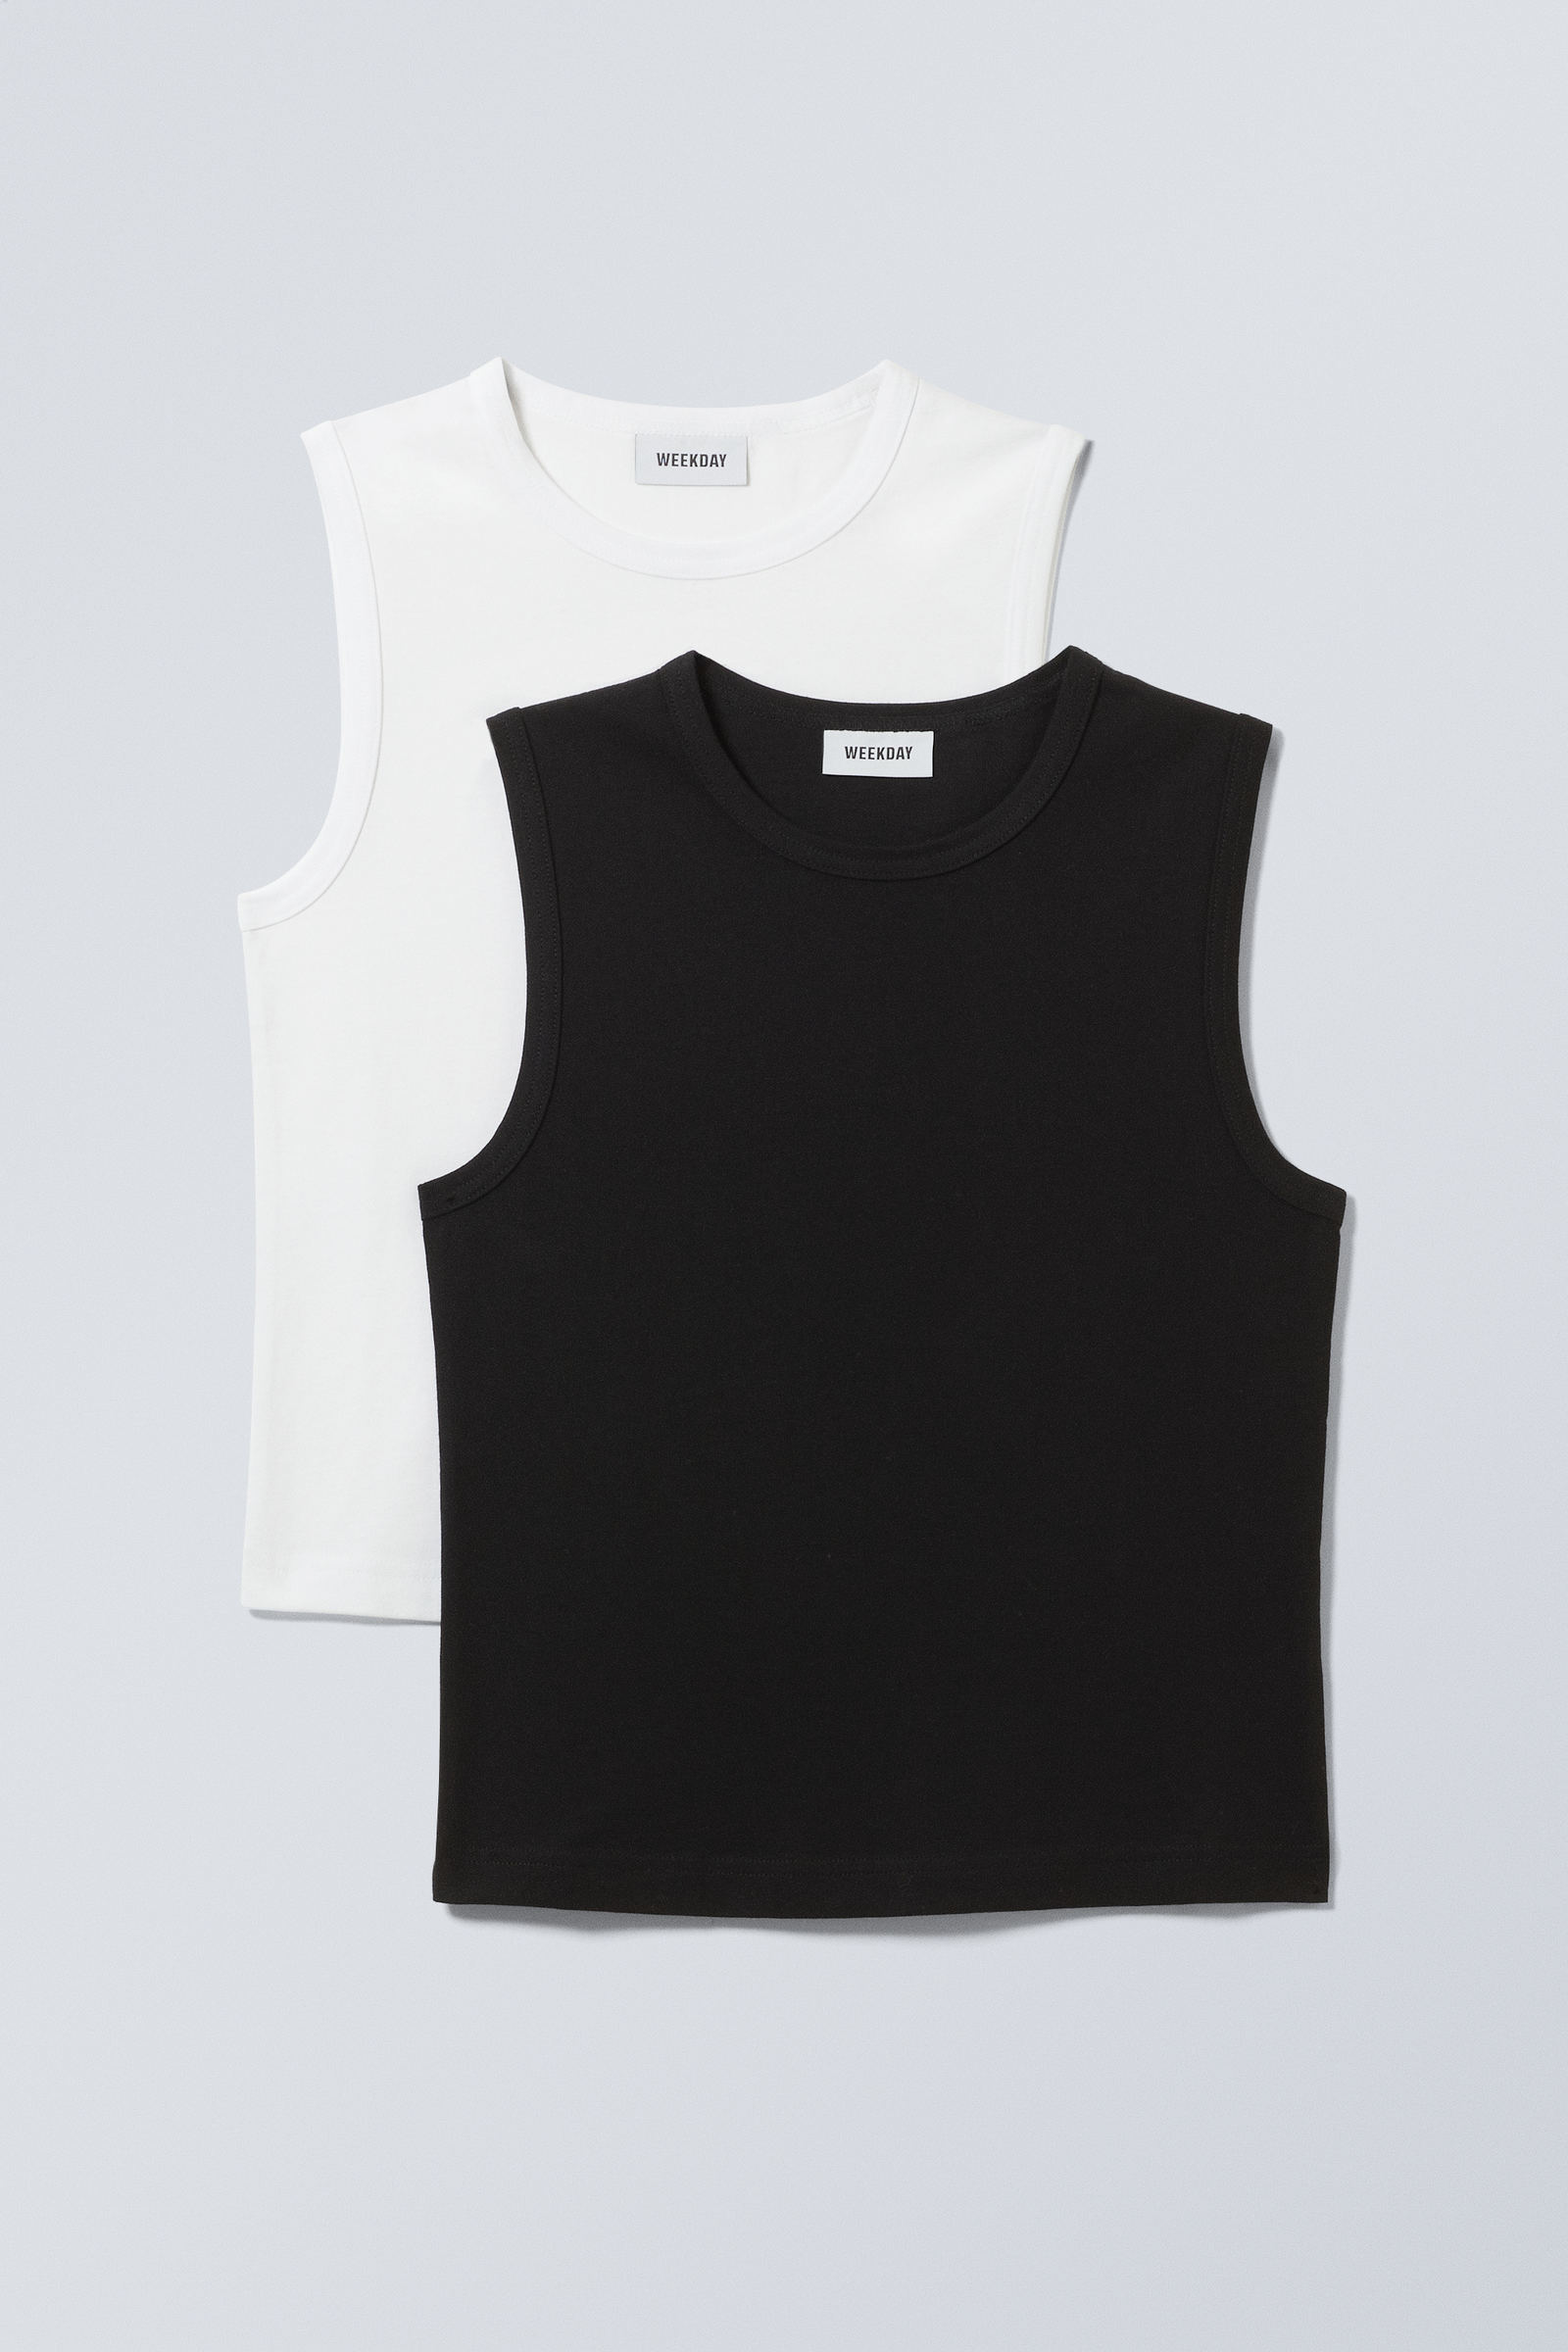 Weekday mesh double layer tank top in off-white